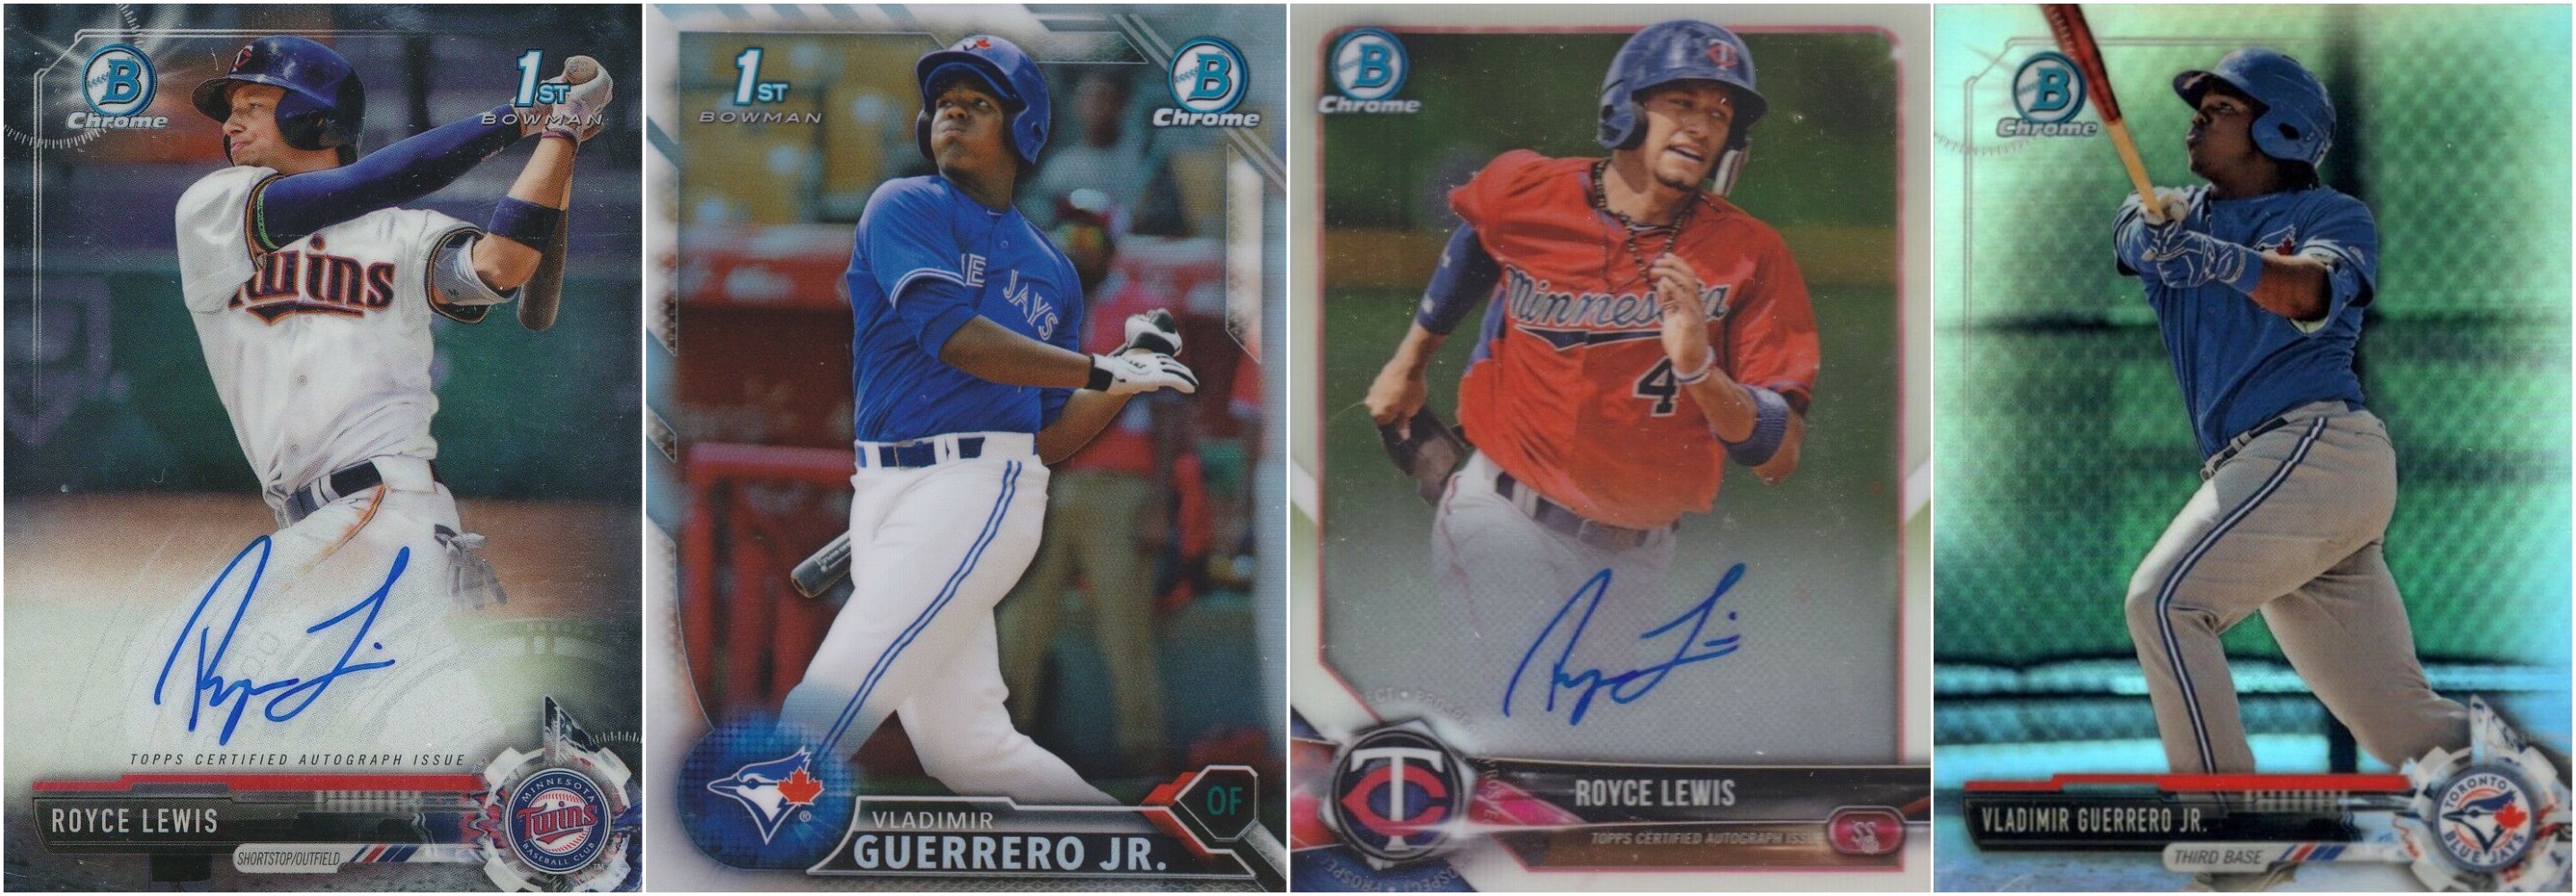 Images of baseball sports trading card for Royce Lewis and Vladmir Guerrero, Jr.